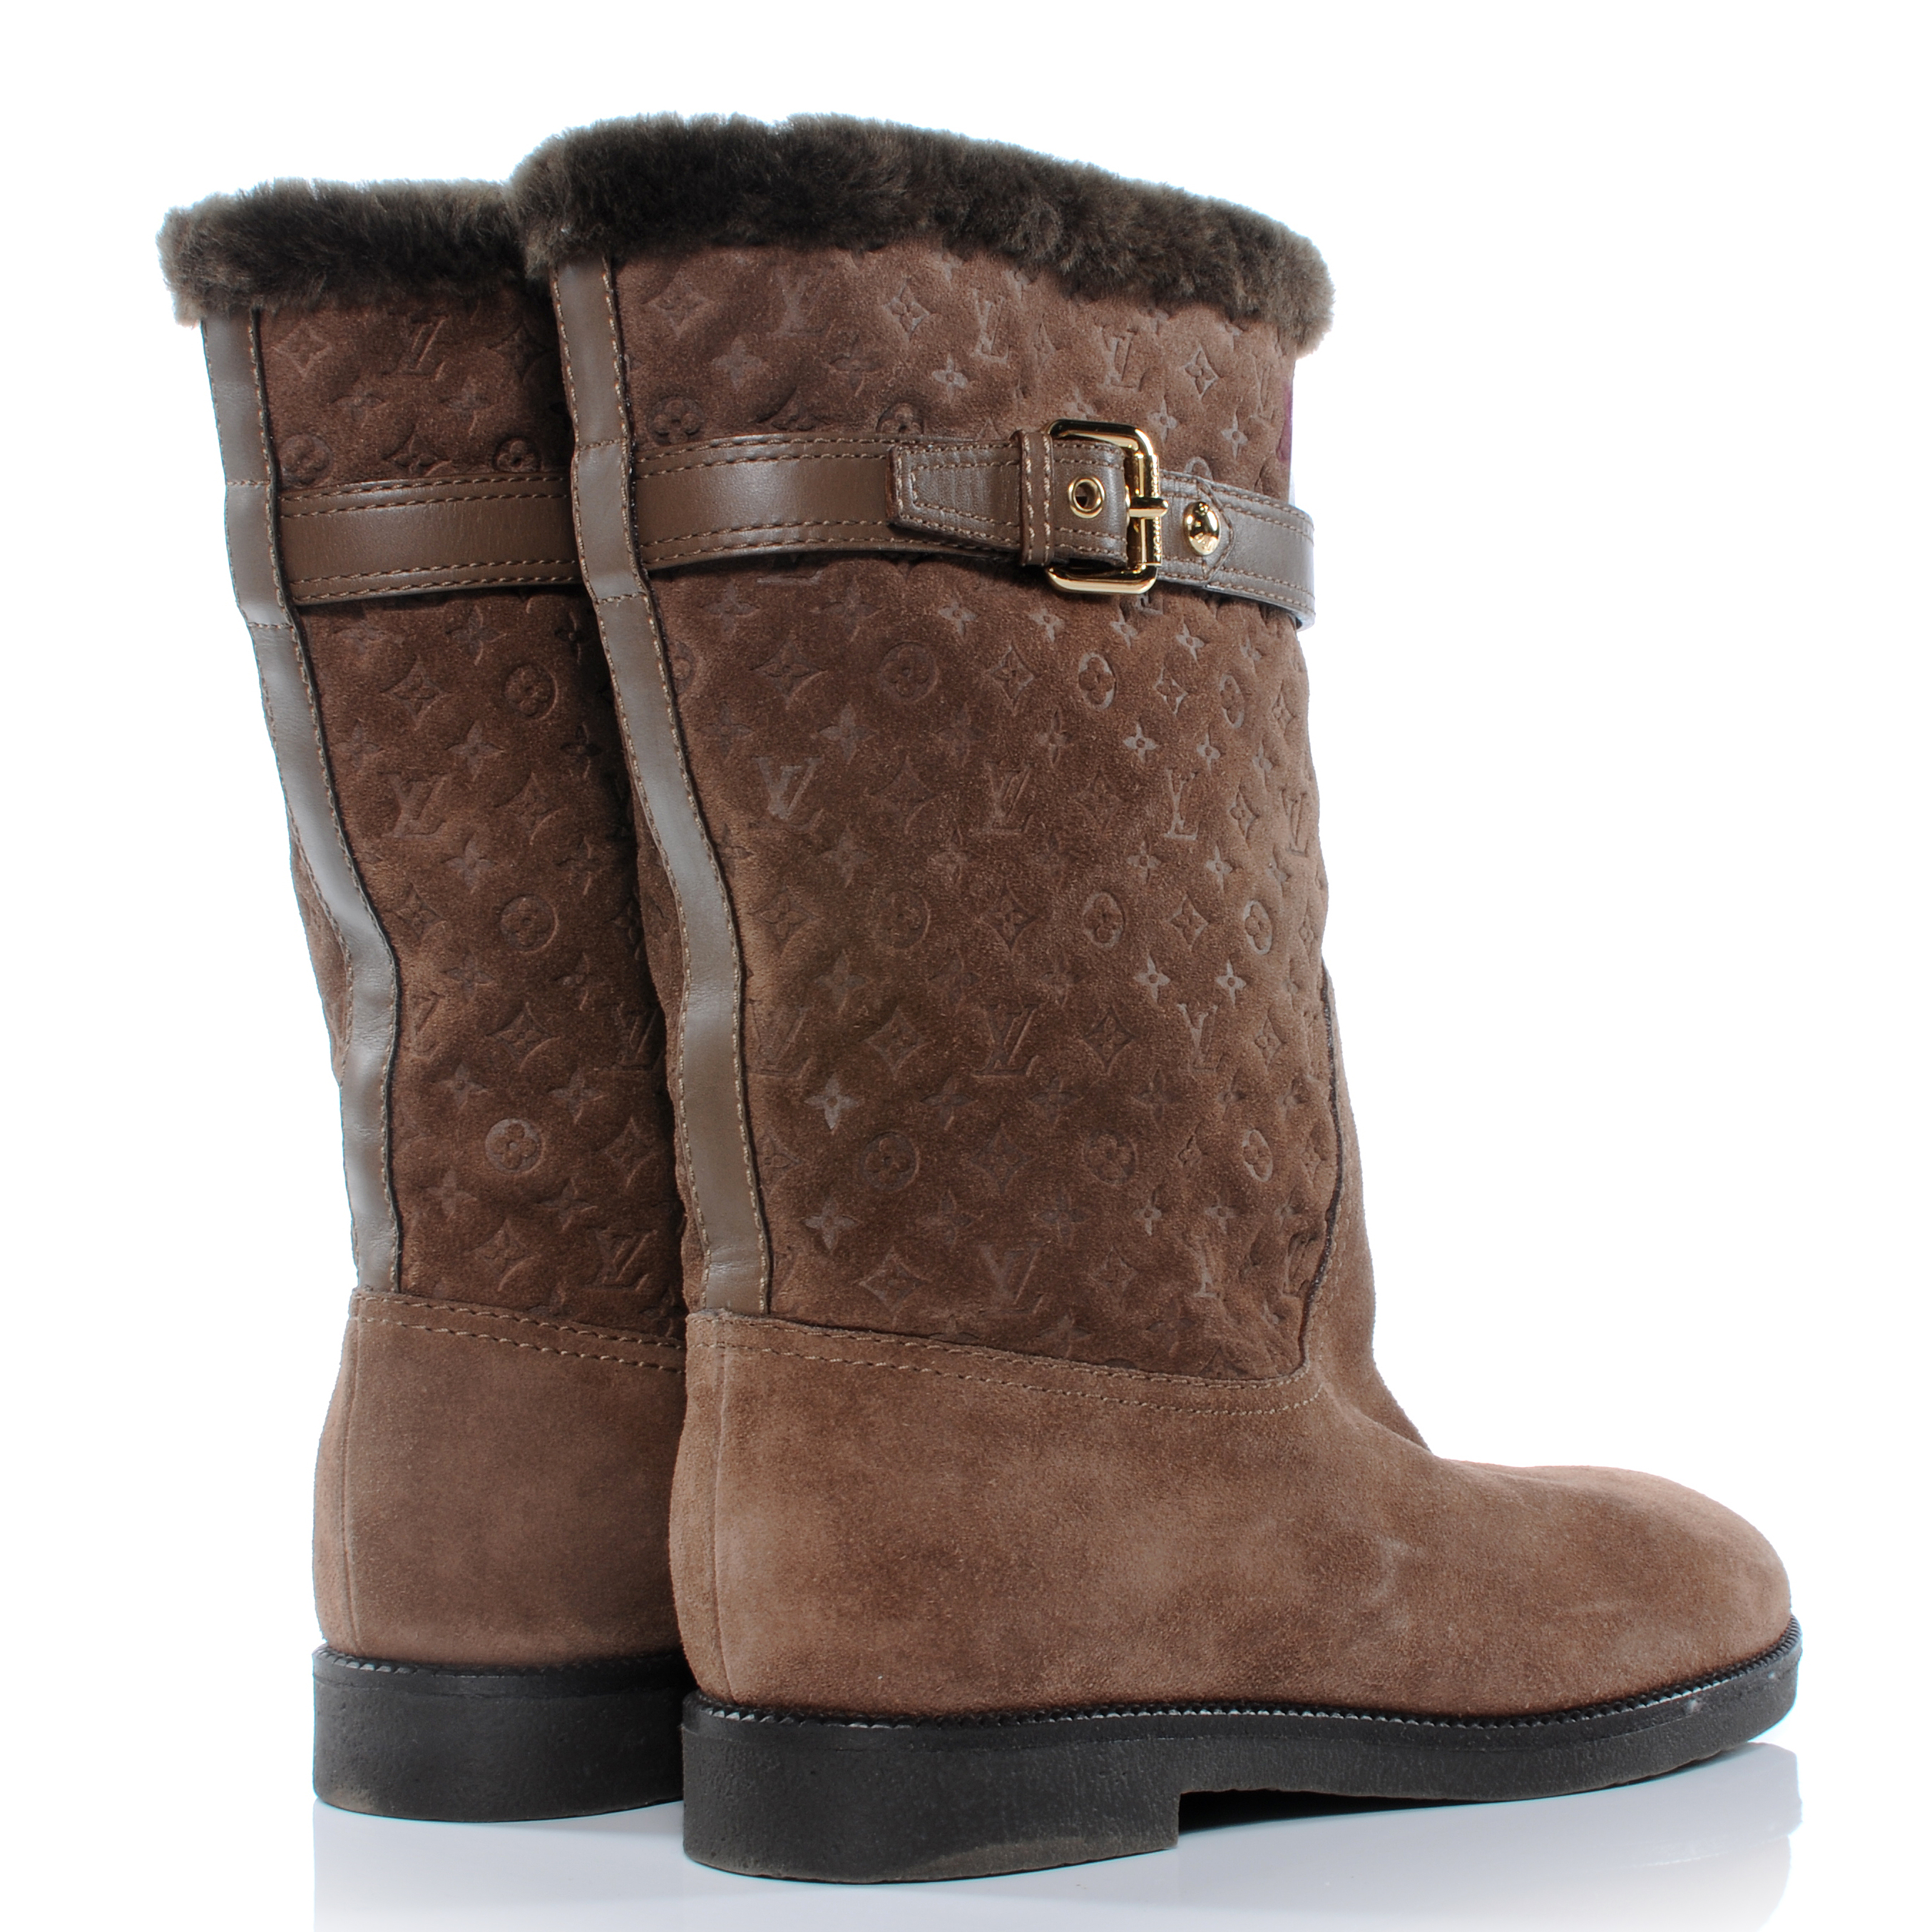 LOUIS VUITTON Suede Fur Wintry Boots 41 Brown 40586